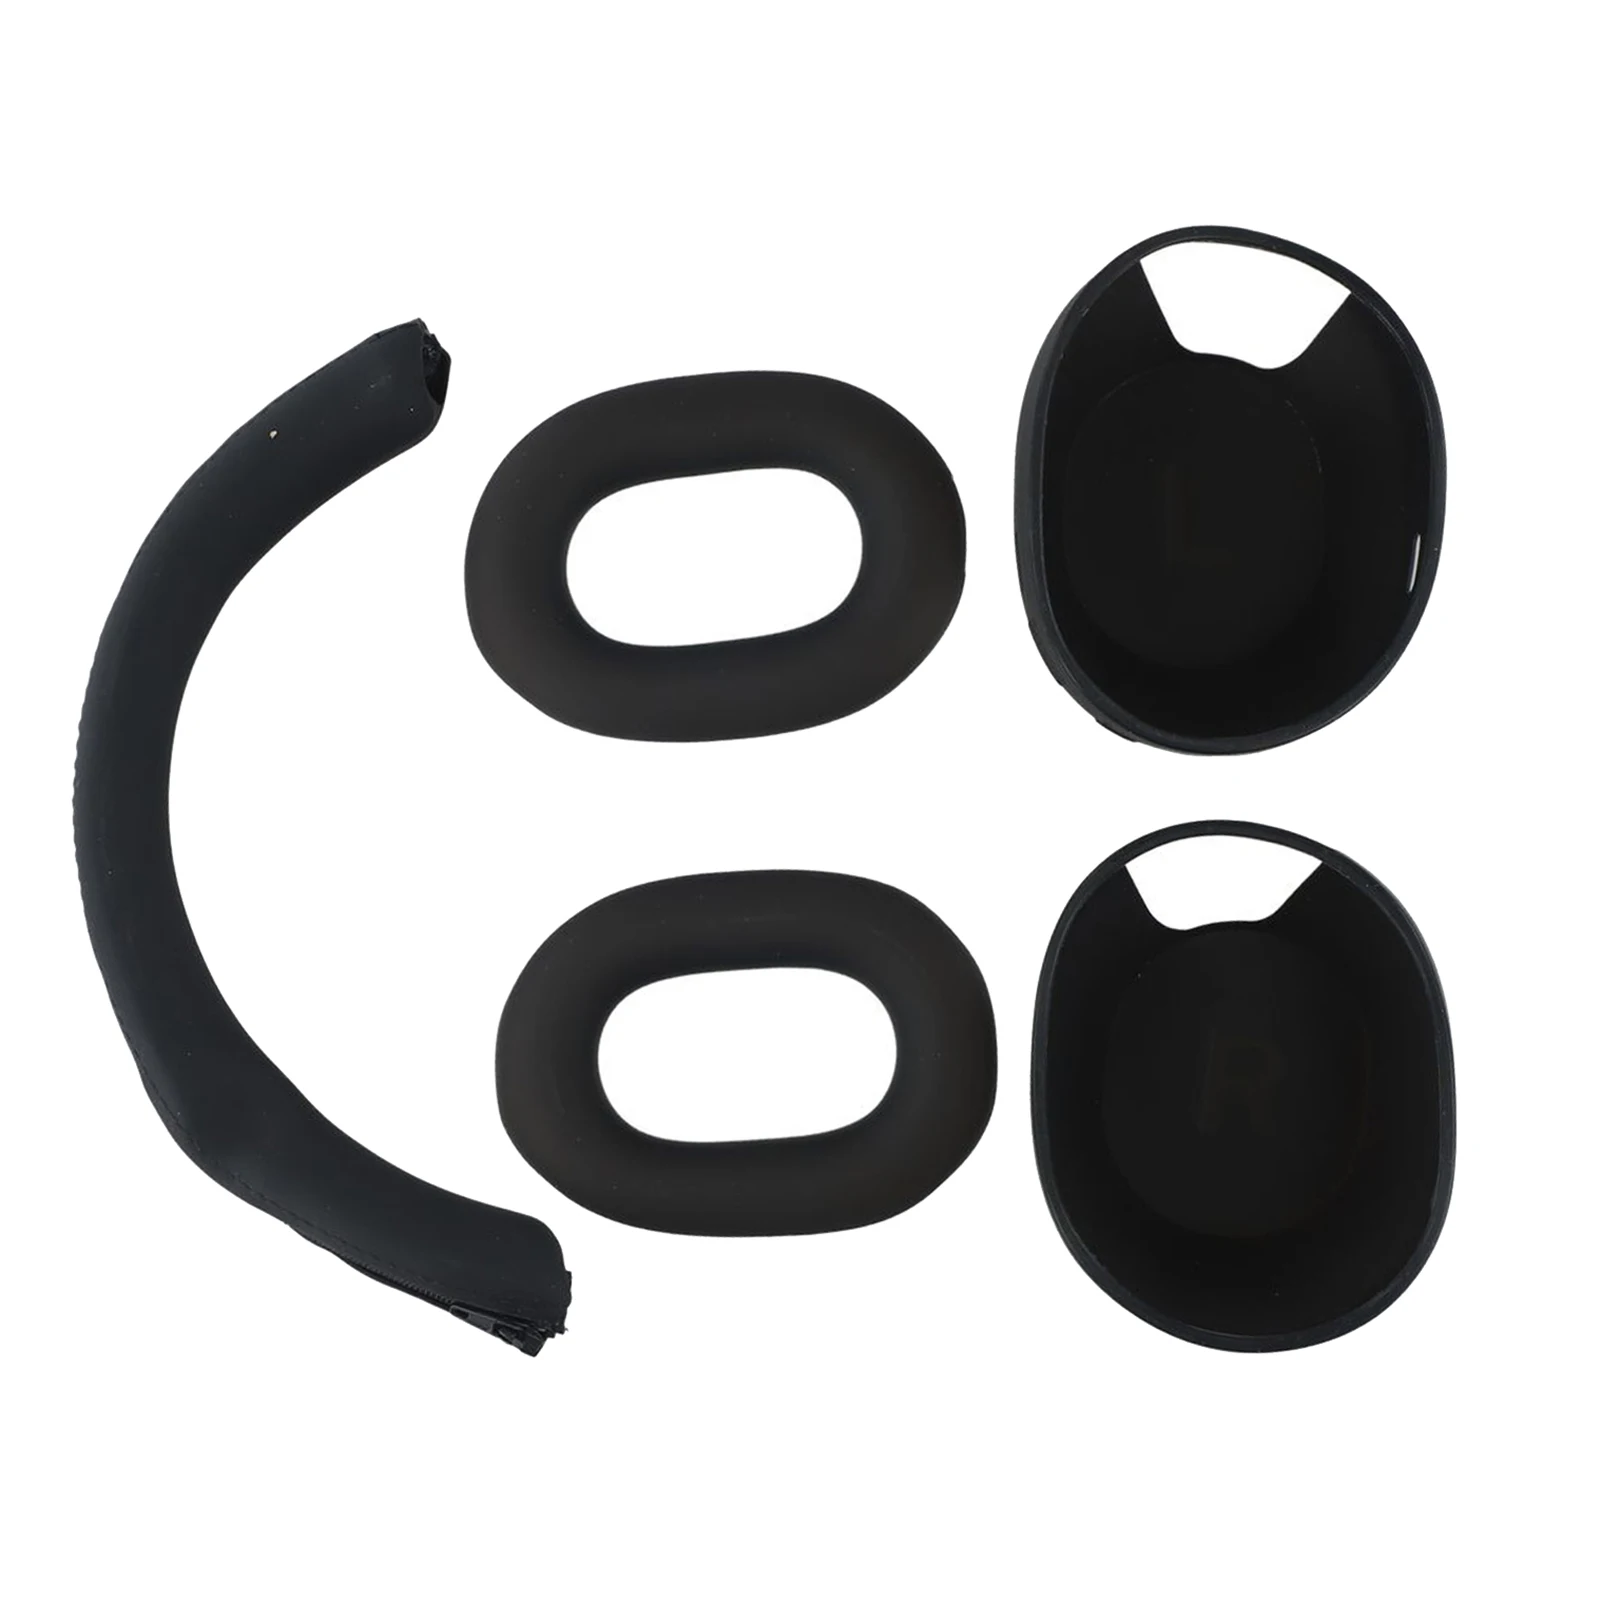 

Shell Cover Headband Cover Ear Cap Cover For Sony WH-1000XM5 Replacement Earpads Cushions Silicone Headband Protectors